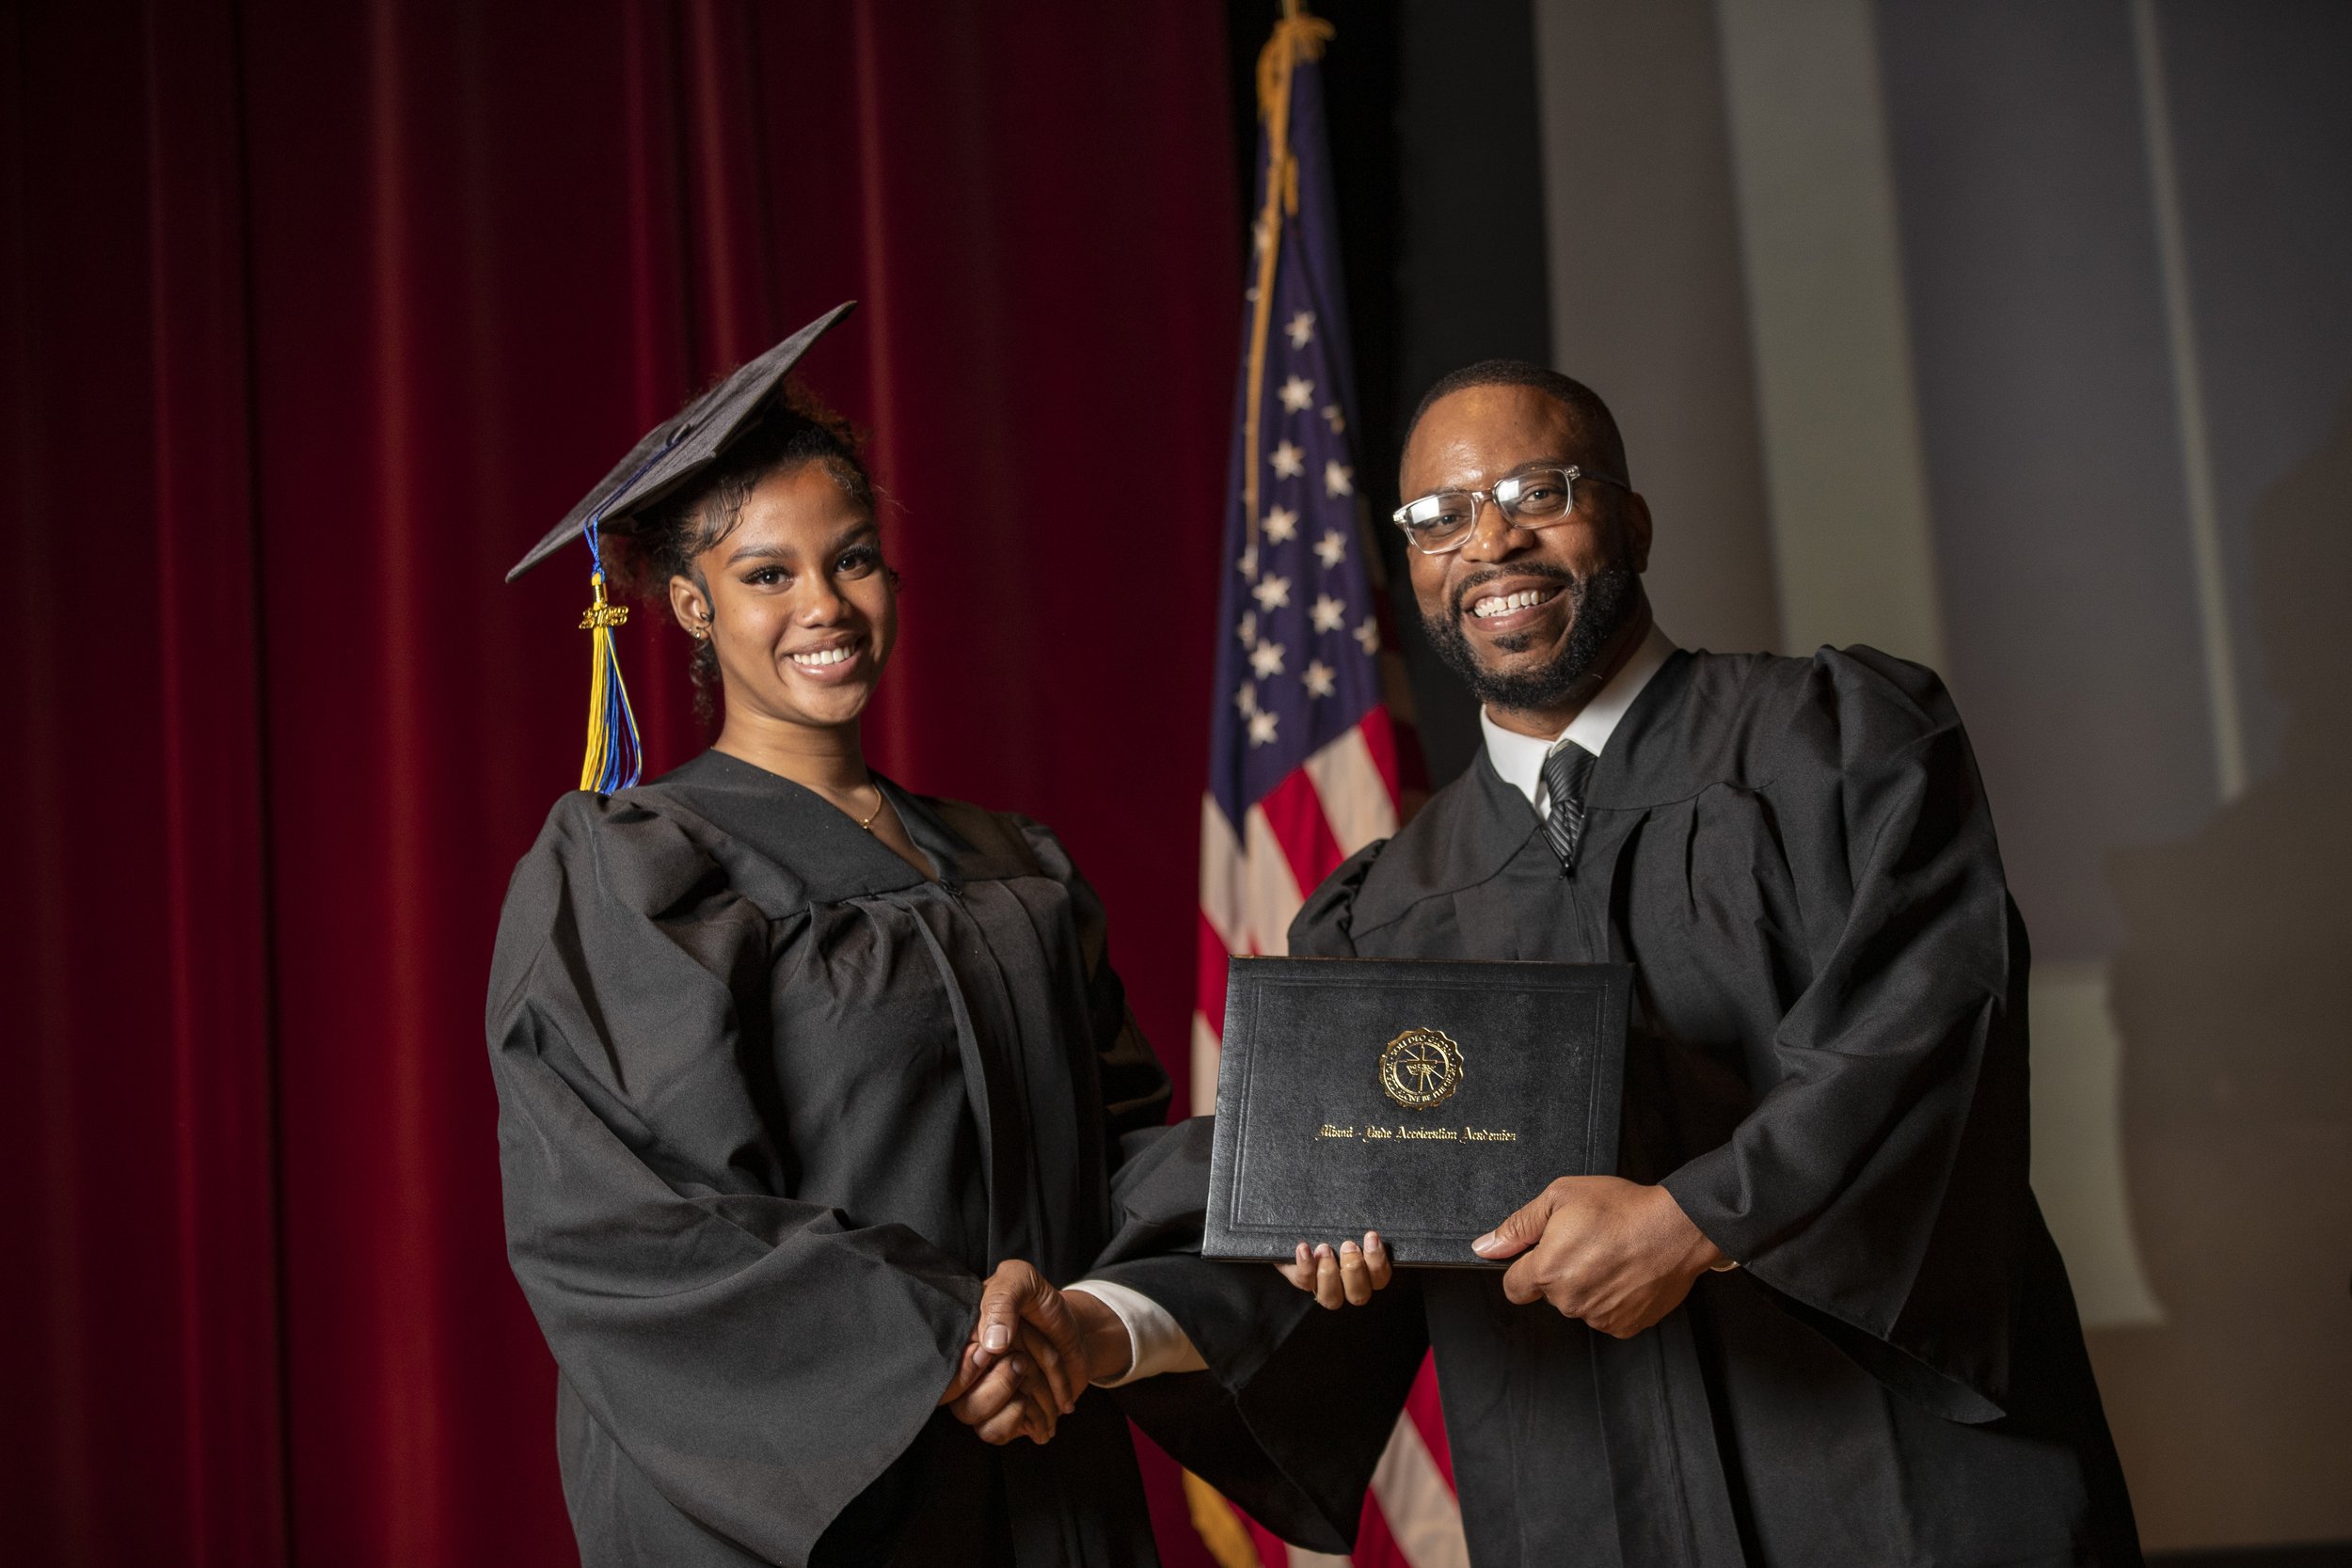 How Well Do You Know the Difference? GED vs. High School Diploma image